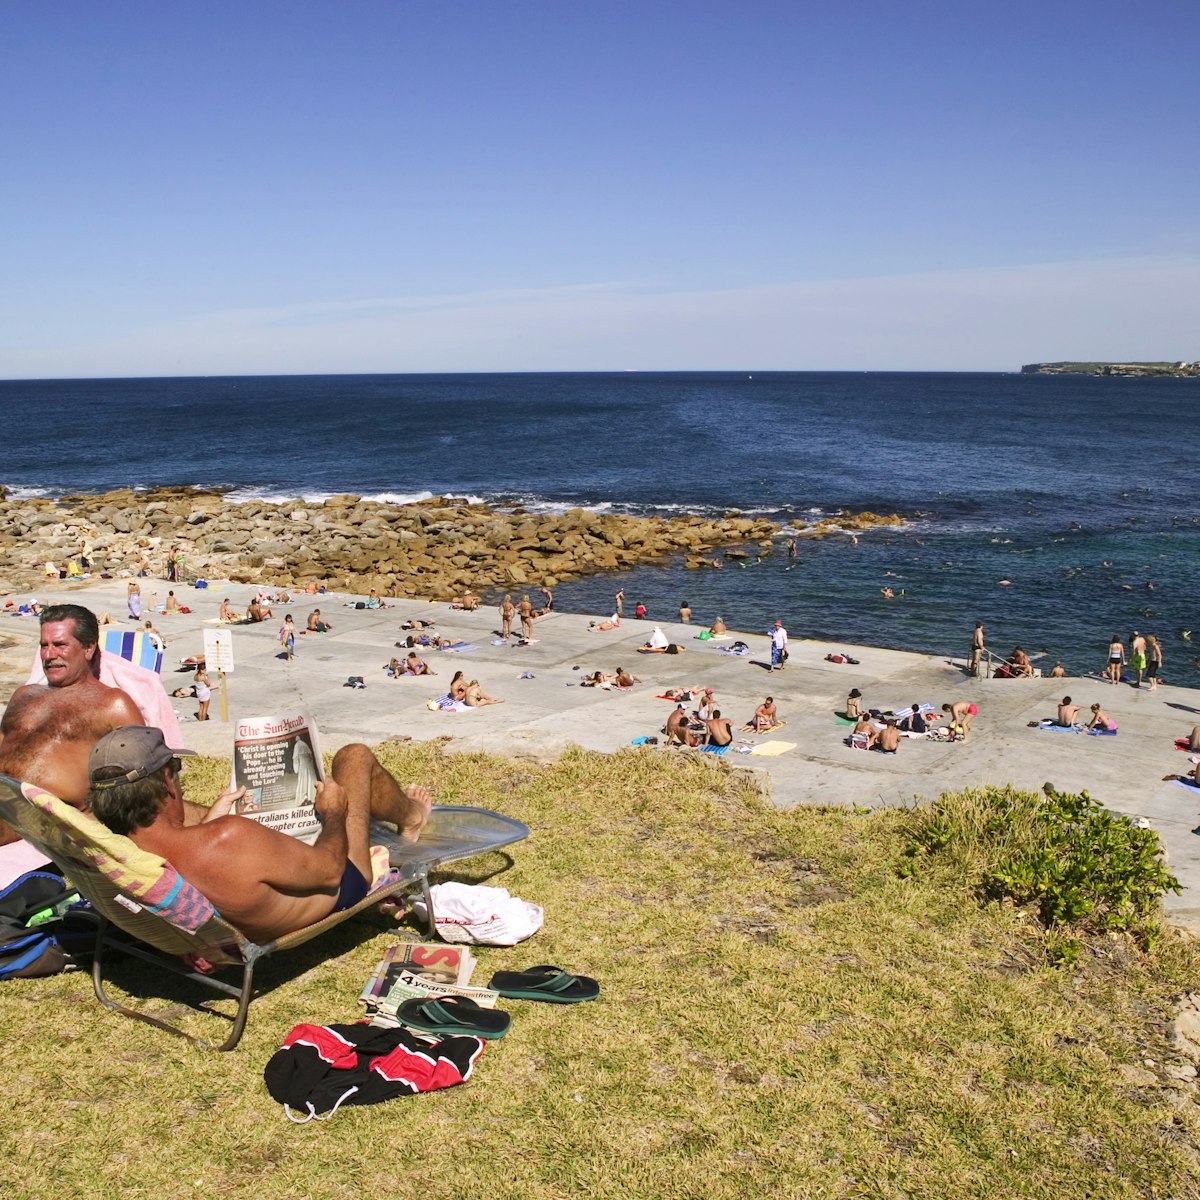 People sunbathing, swimming and snorkelling at the north side of Clovelly Beach.